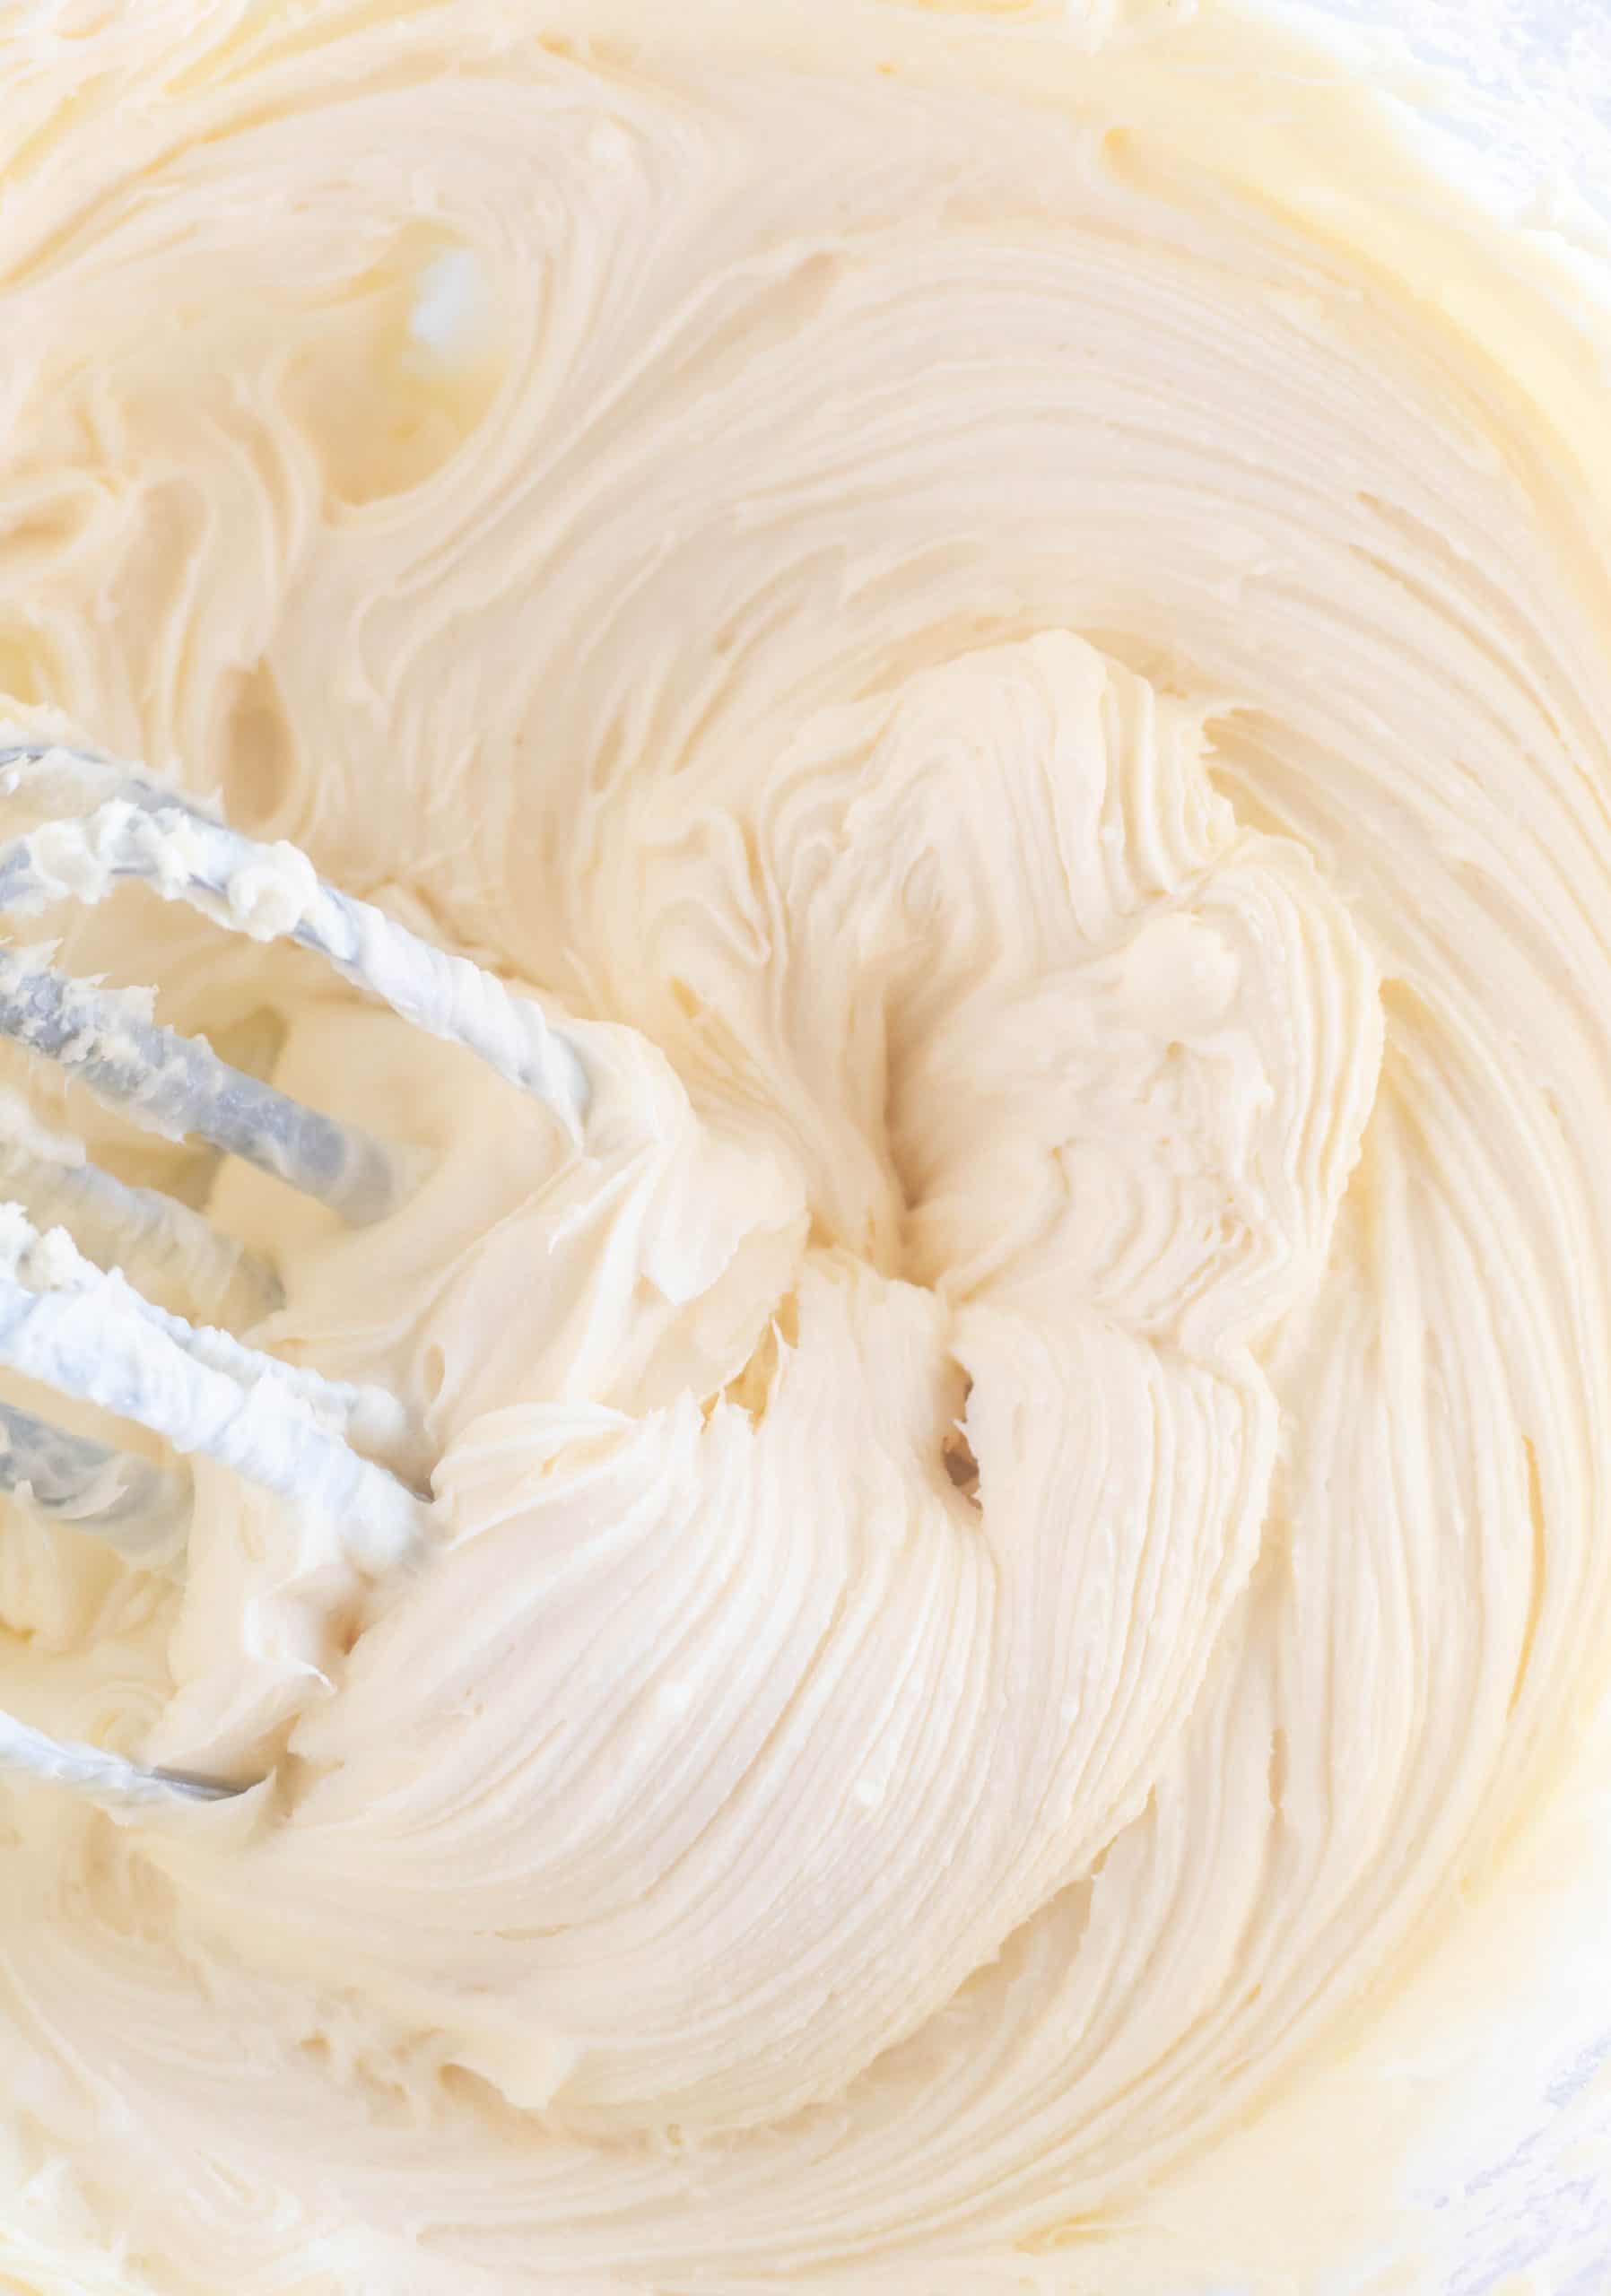 cream cheese frosting in a large bowl with beaters.